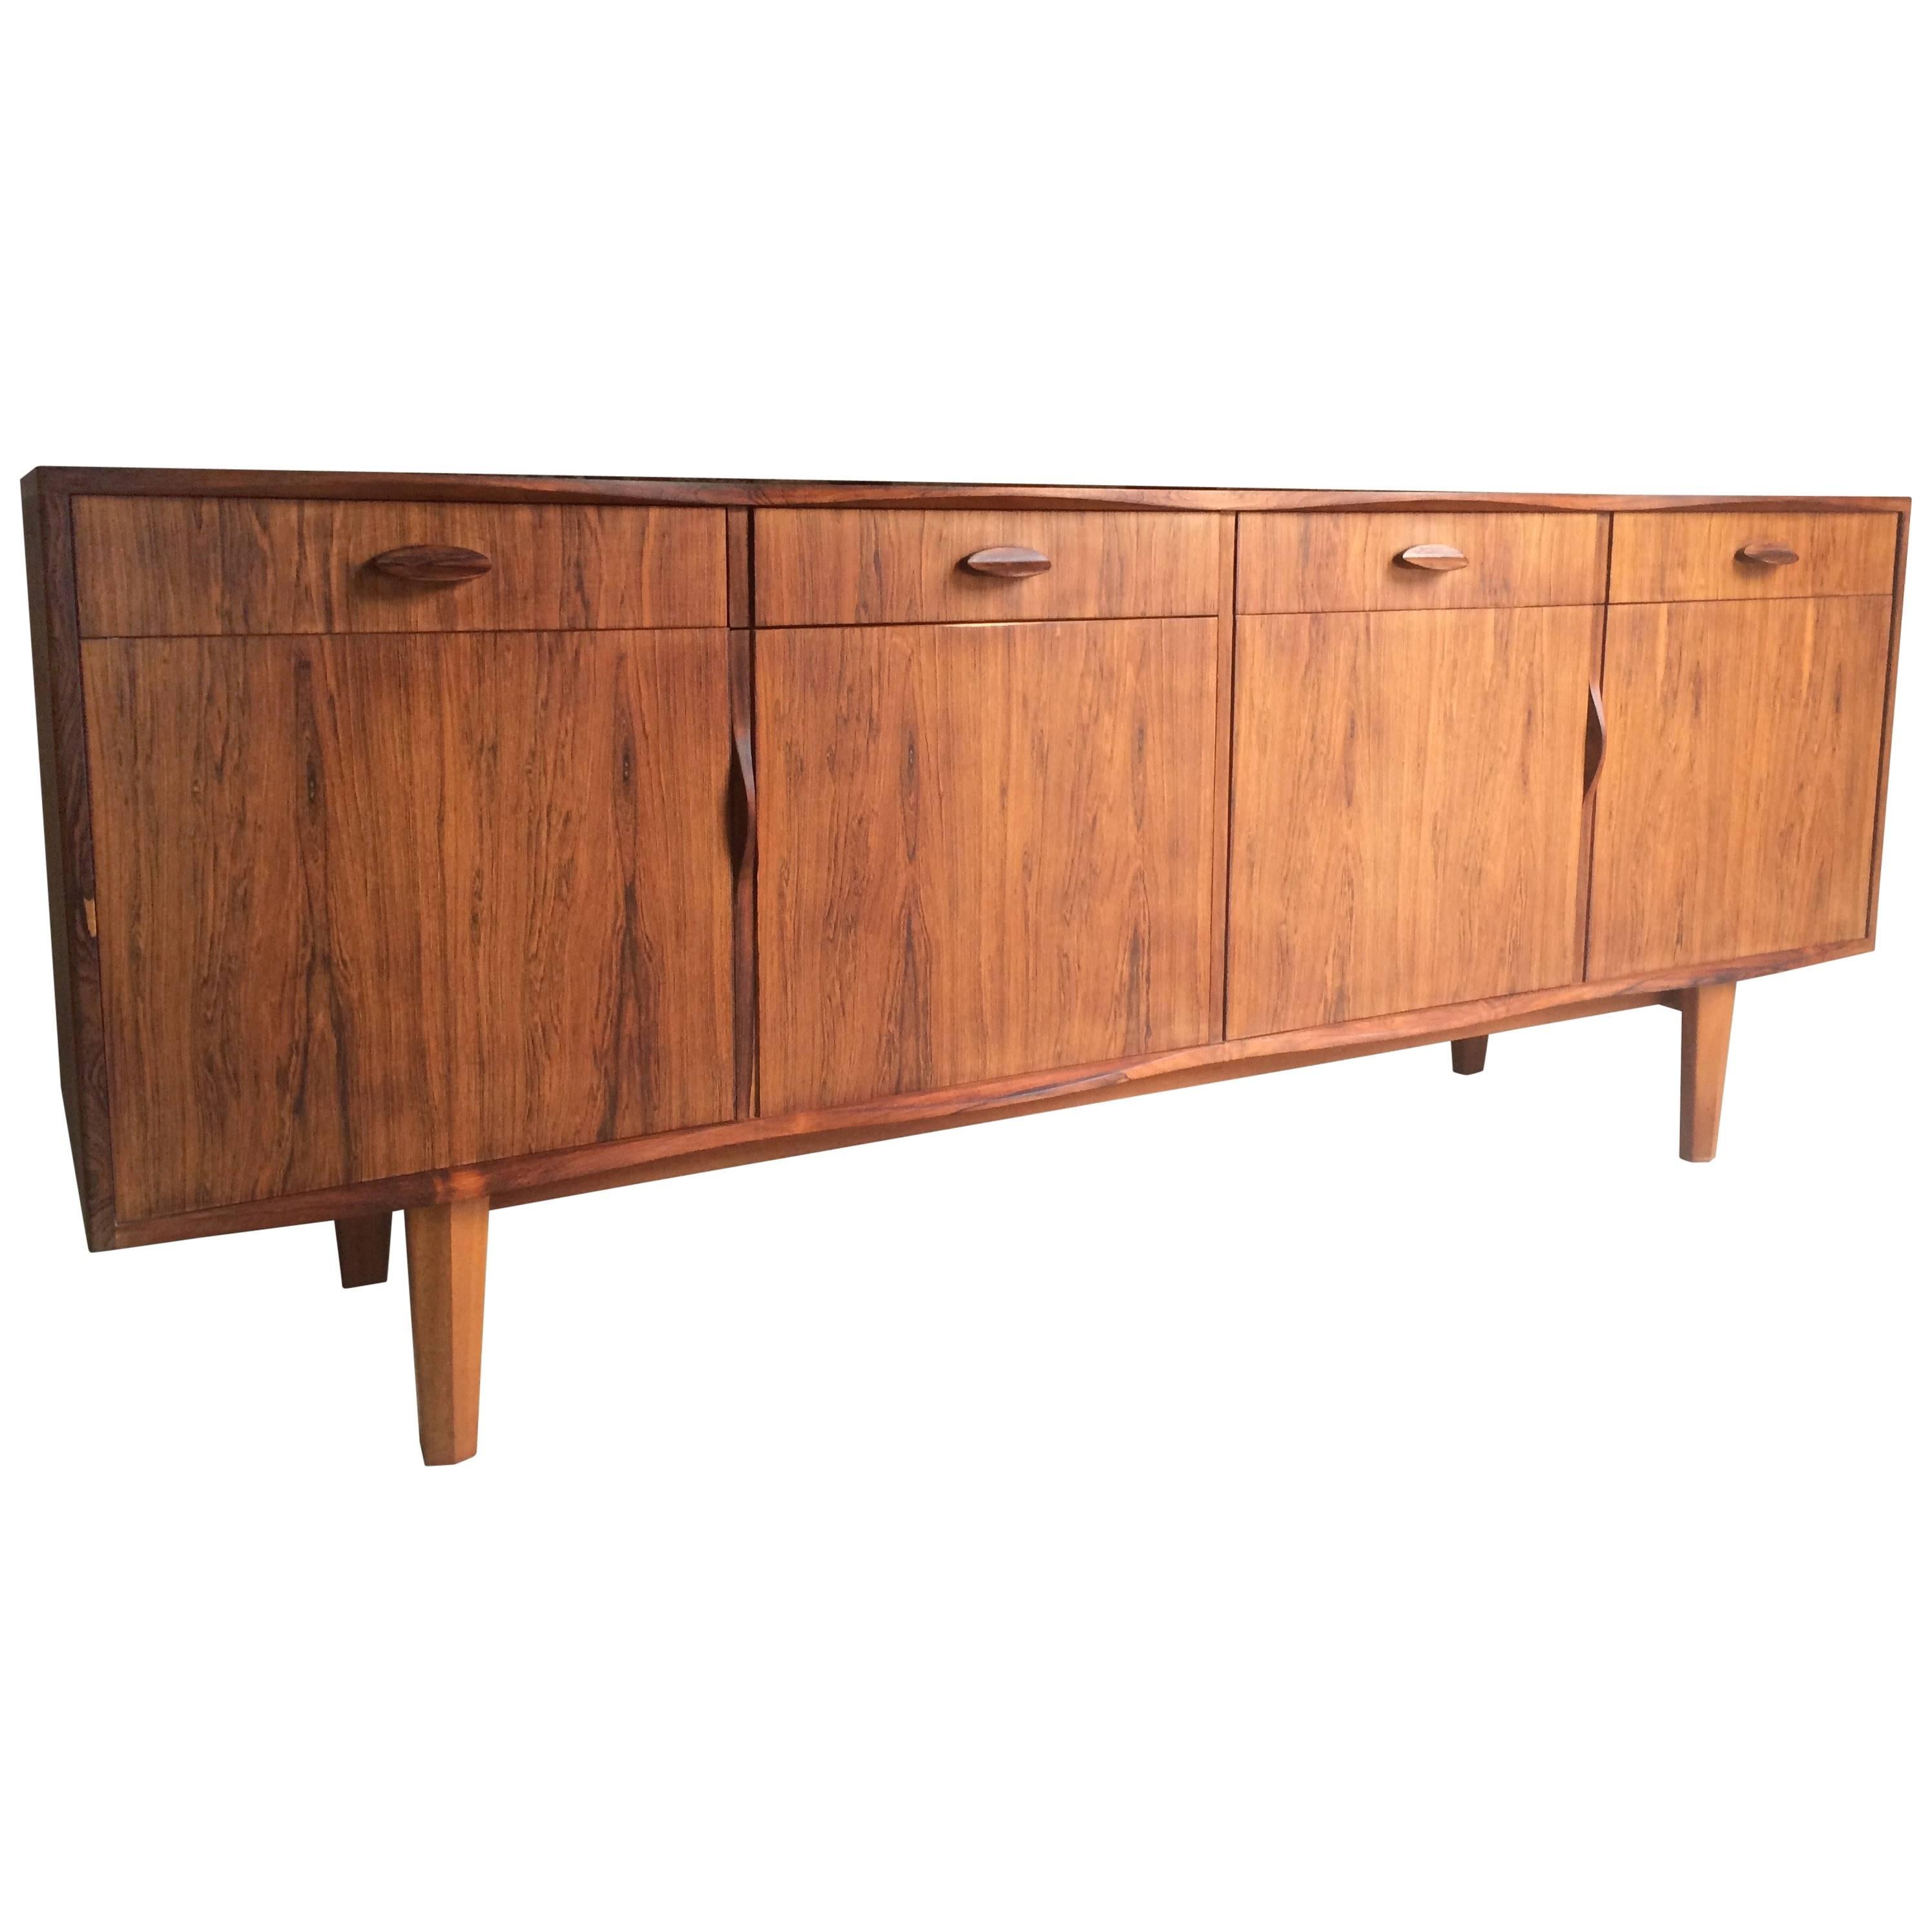 Stunning Gordon Russell R818 Rosewood Credenza Sideboard Lee Longlands, 1965